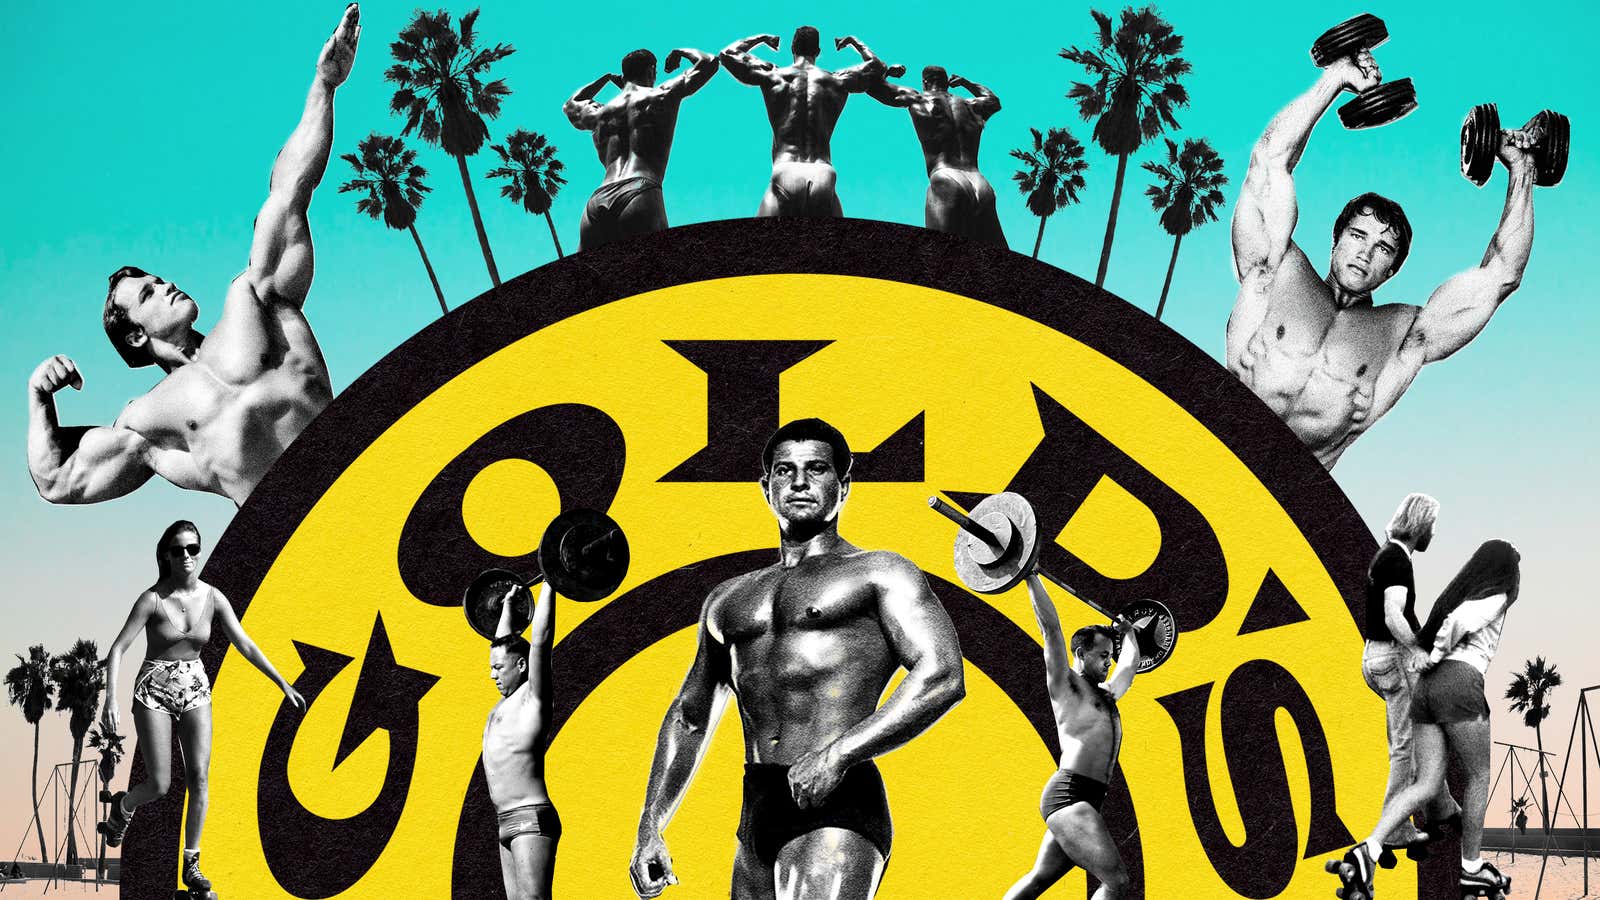 The Oral History of Golds Gym, Where Arnold Schwarzenegger Became A Star